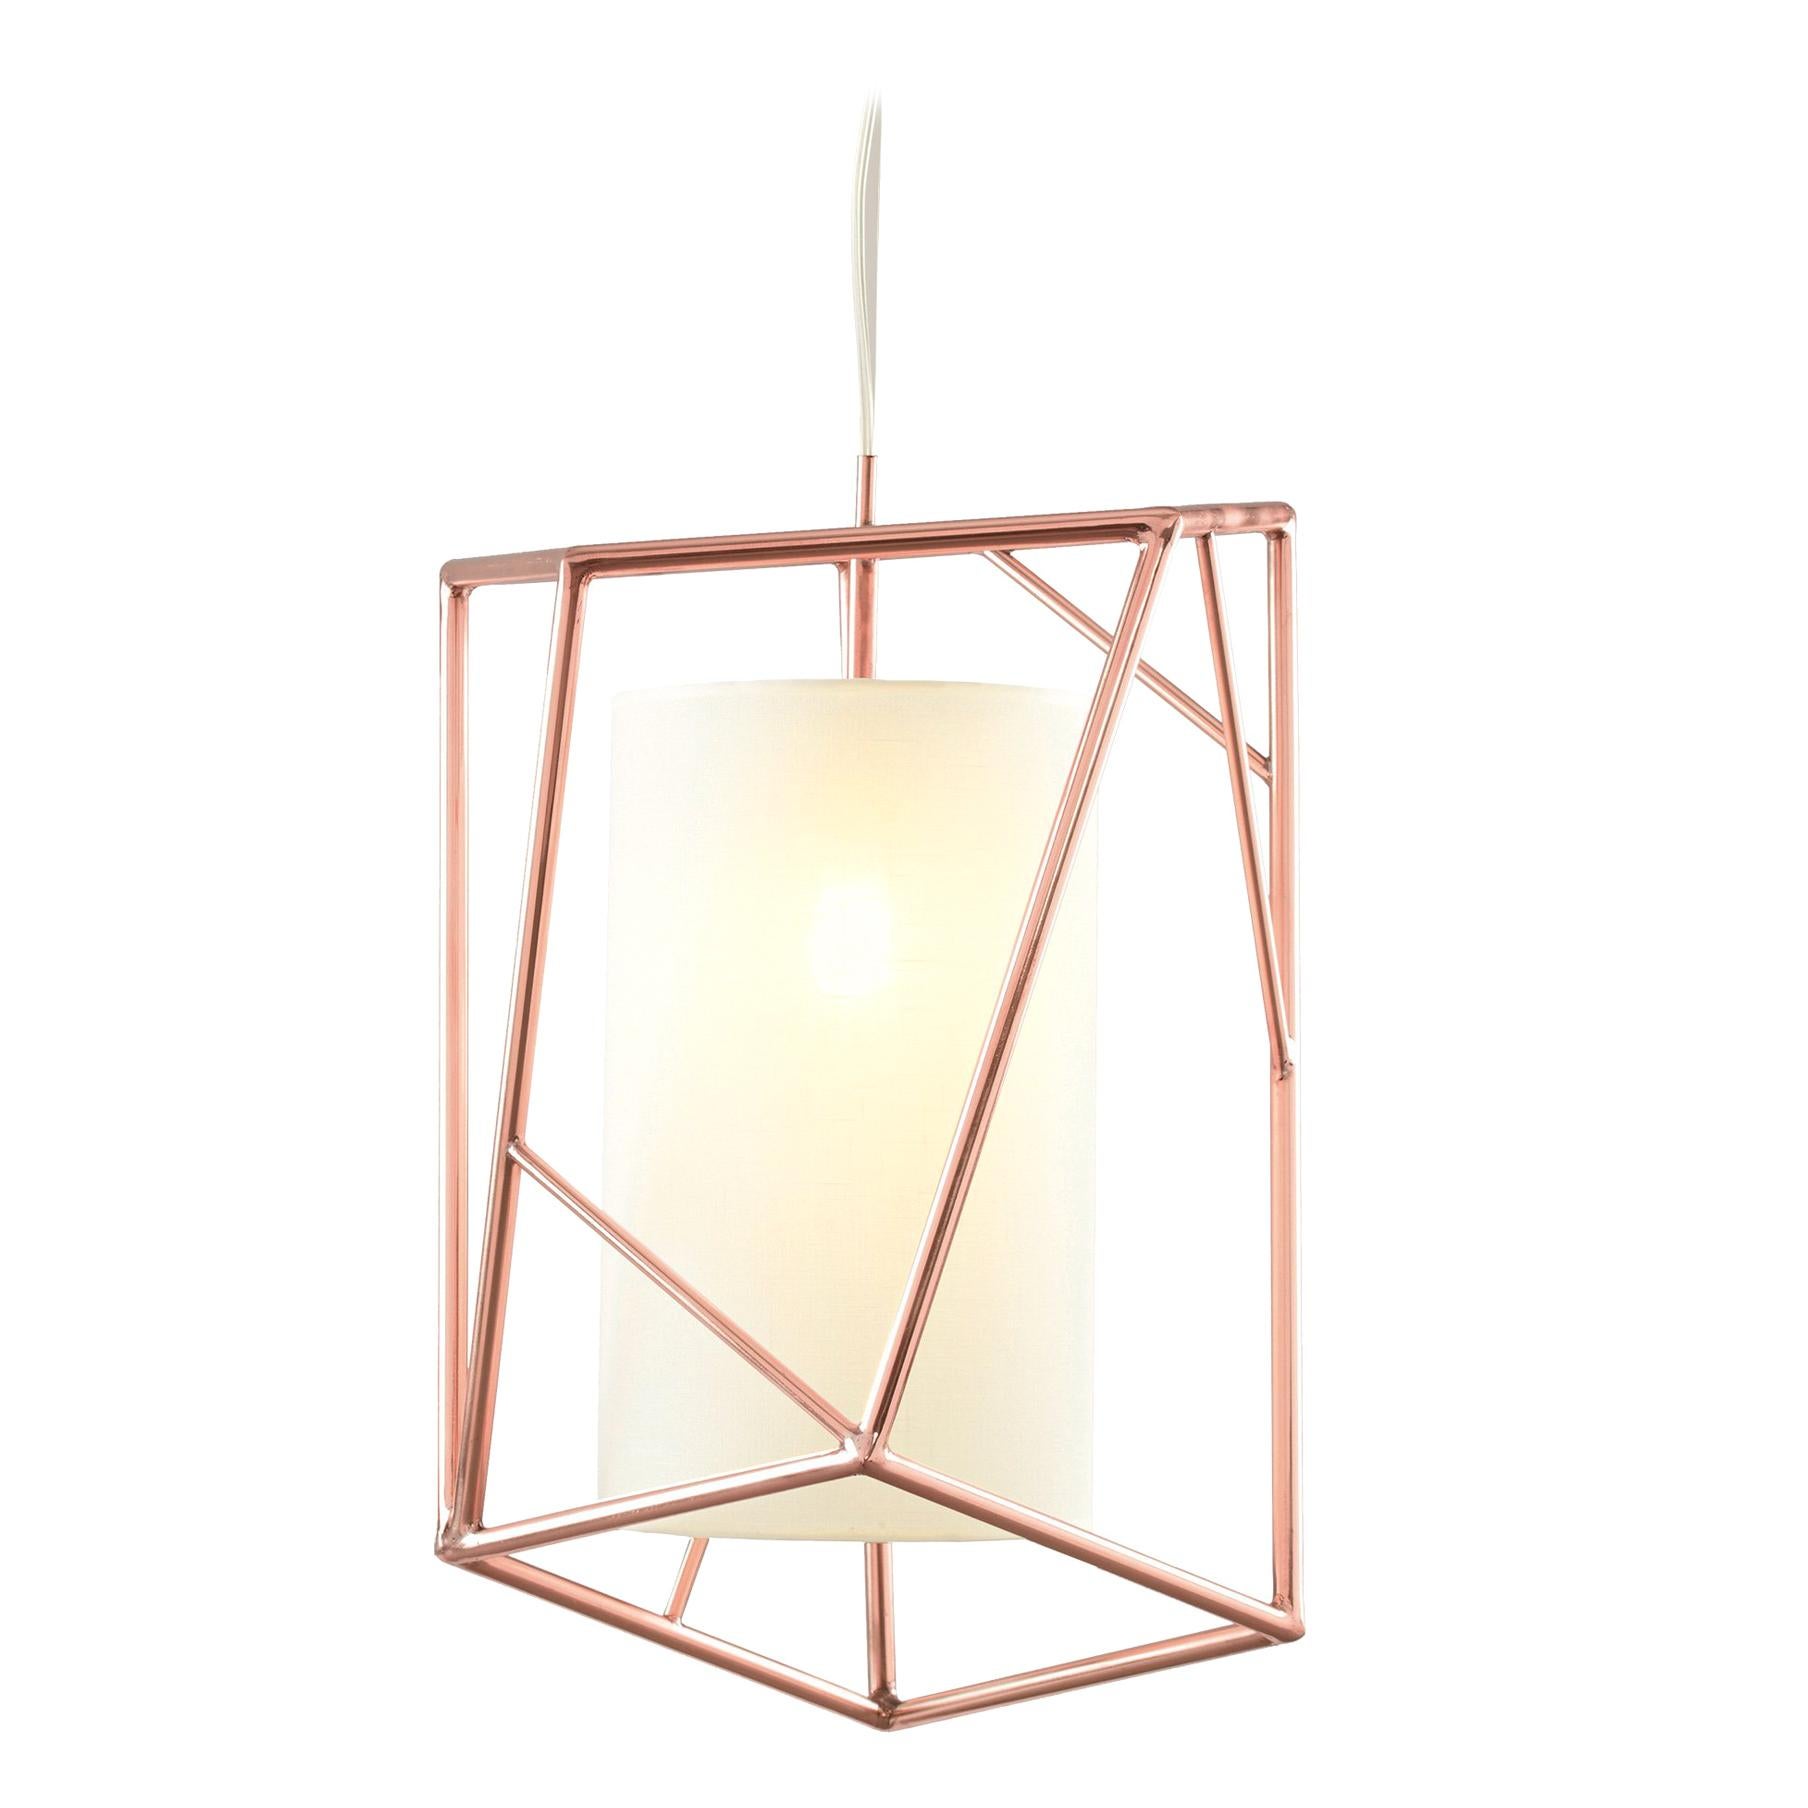 Art Deco Inspired Star III Pendant Lamp Polished Copper and Linen Shade For Sale